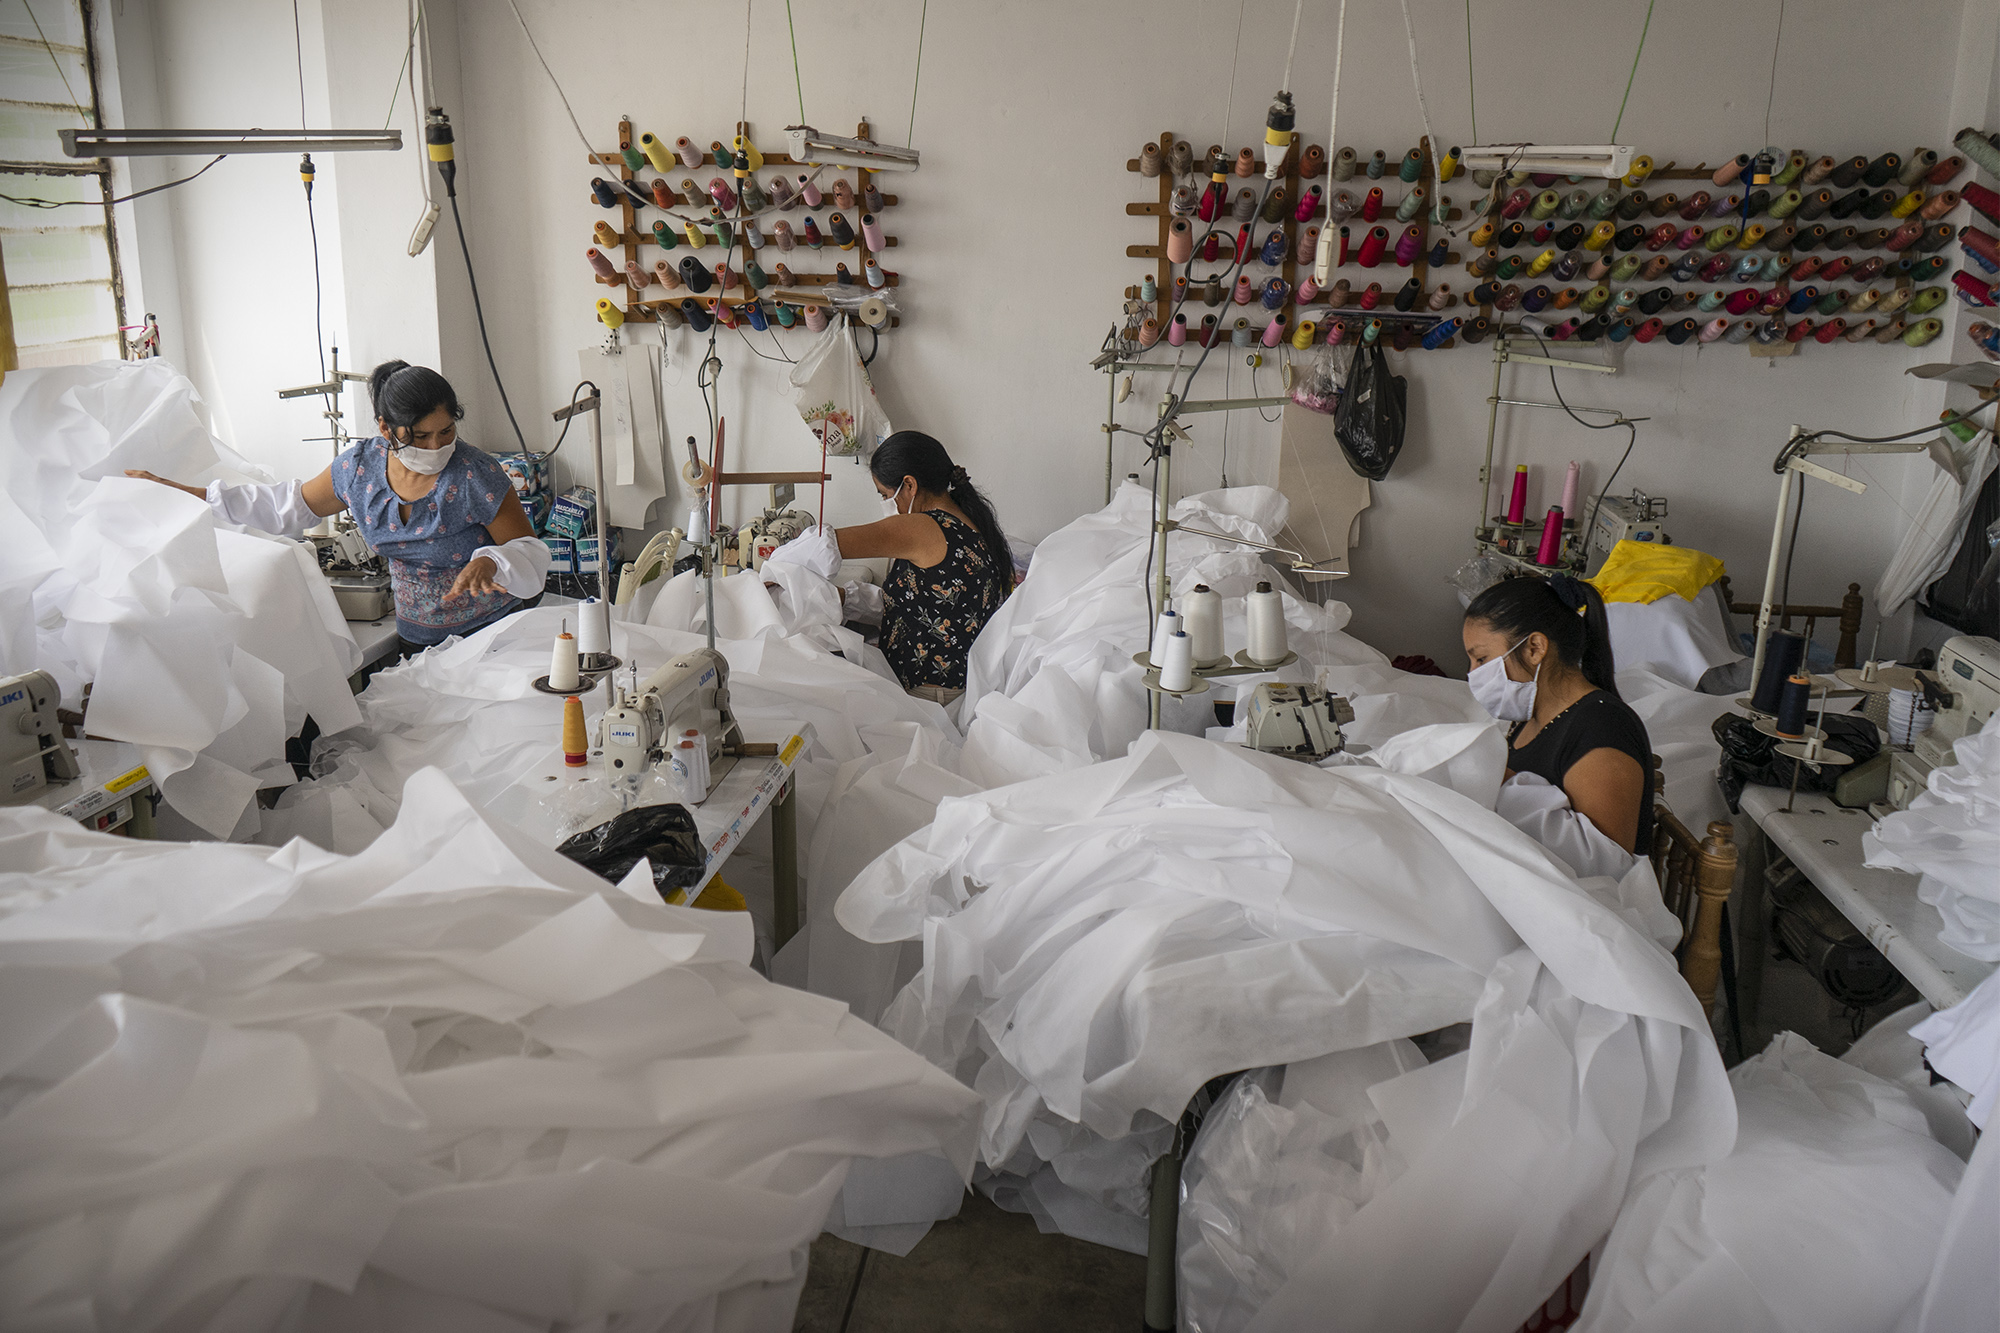 <p>The textile sector has been one of the hardest hit by Covid-19 and economic recession in Peru. Women have been lost more jobs over the past few months than men. (Image: Leslie Moreno Custodio)</p>